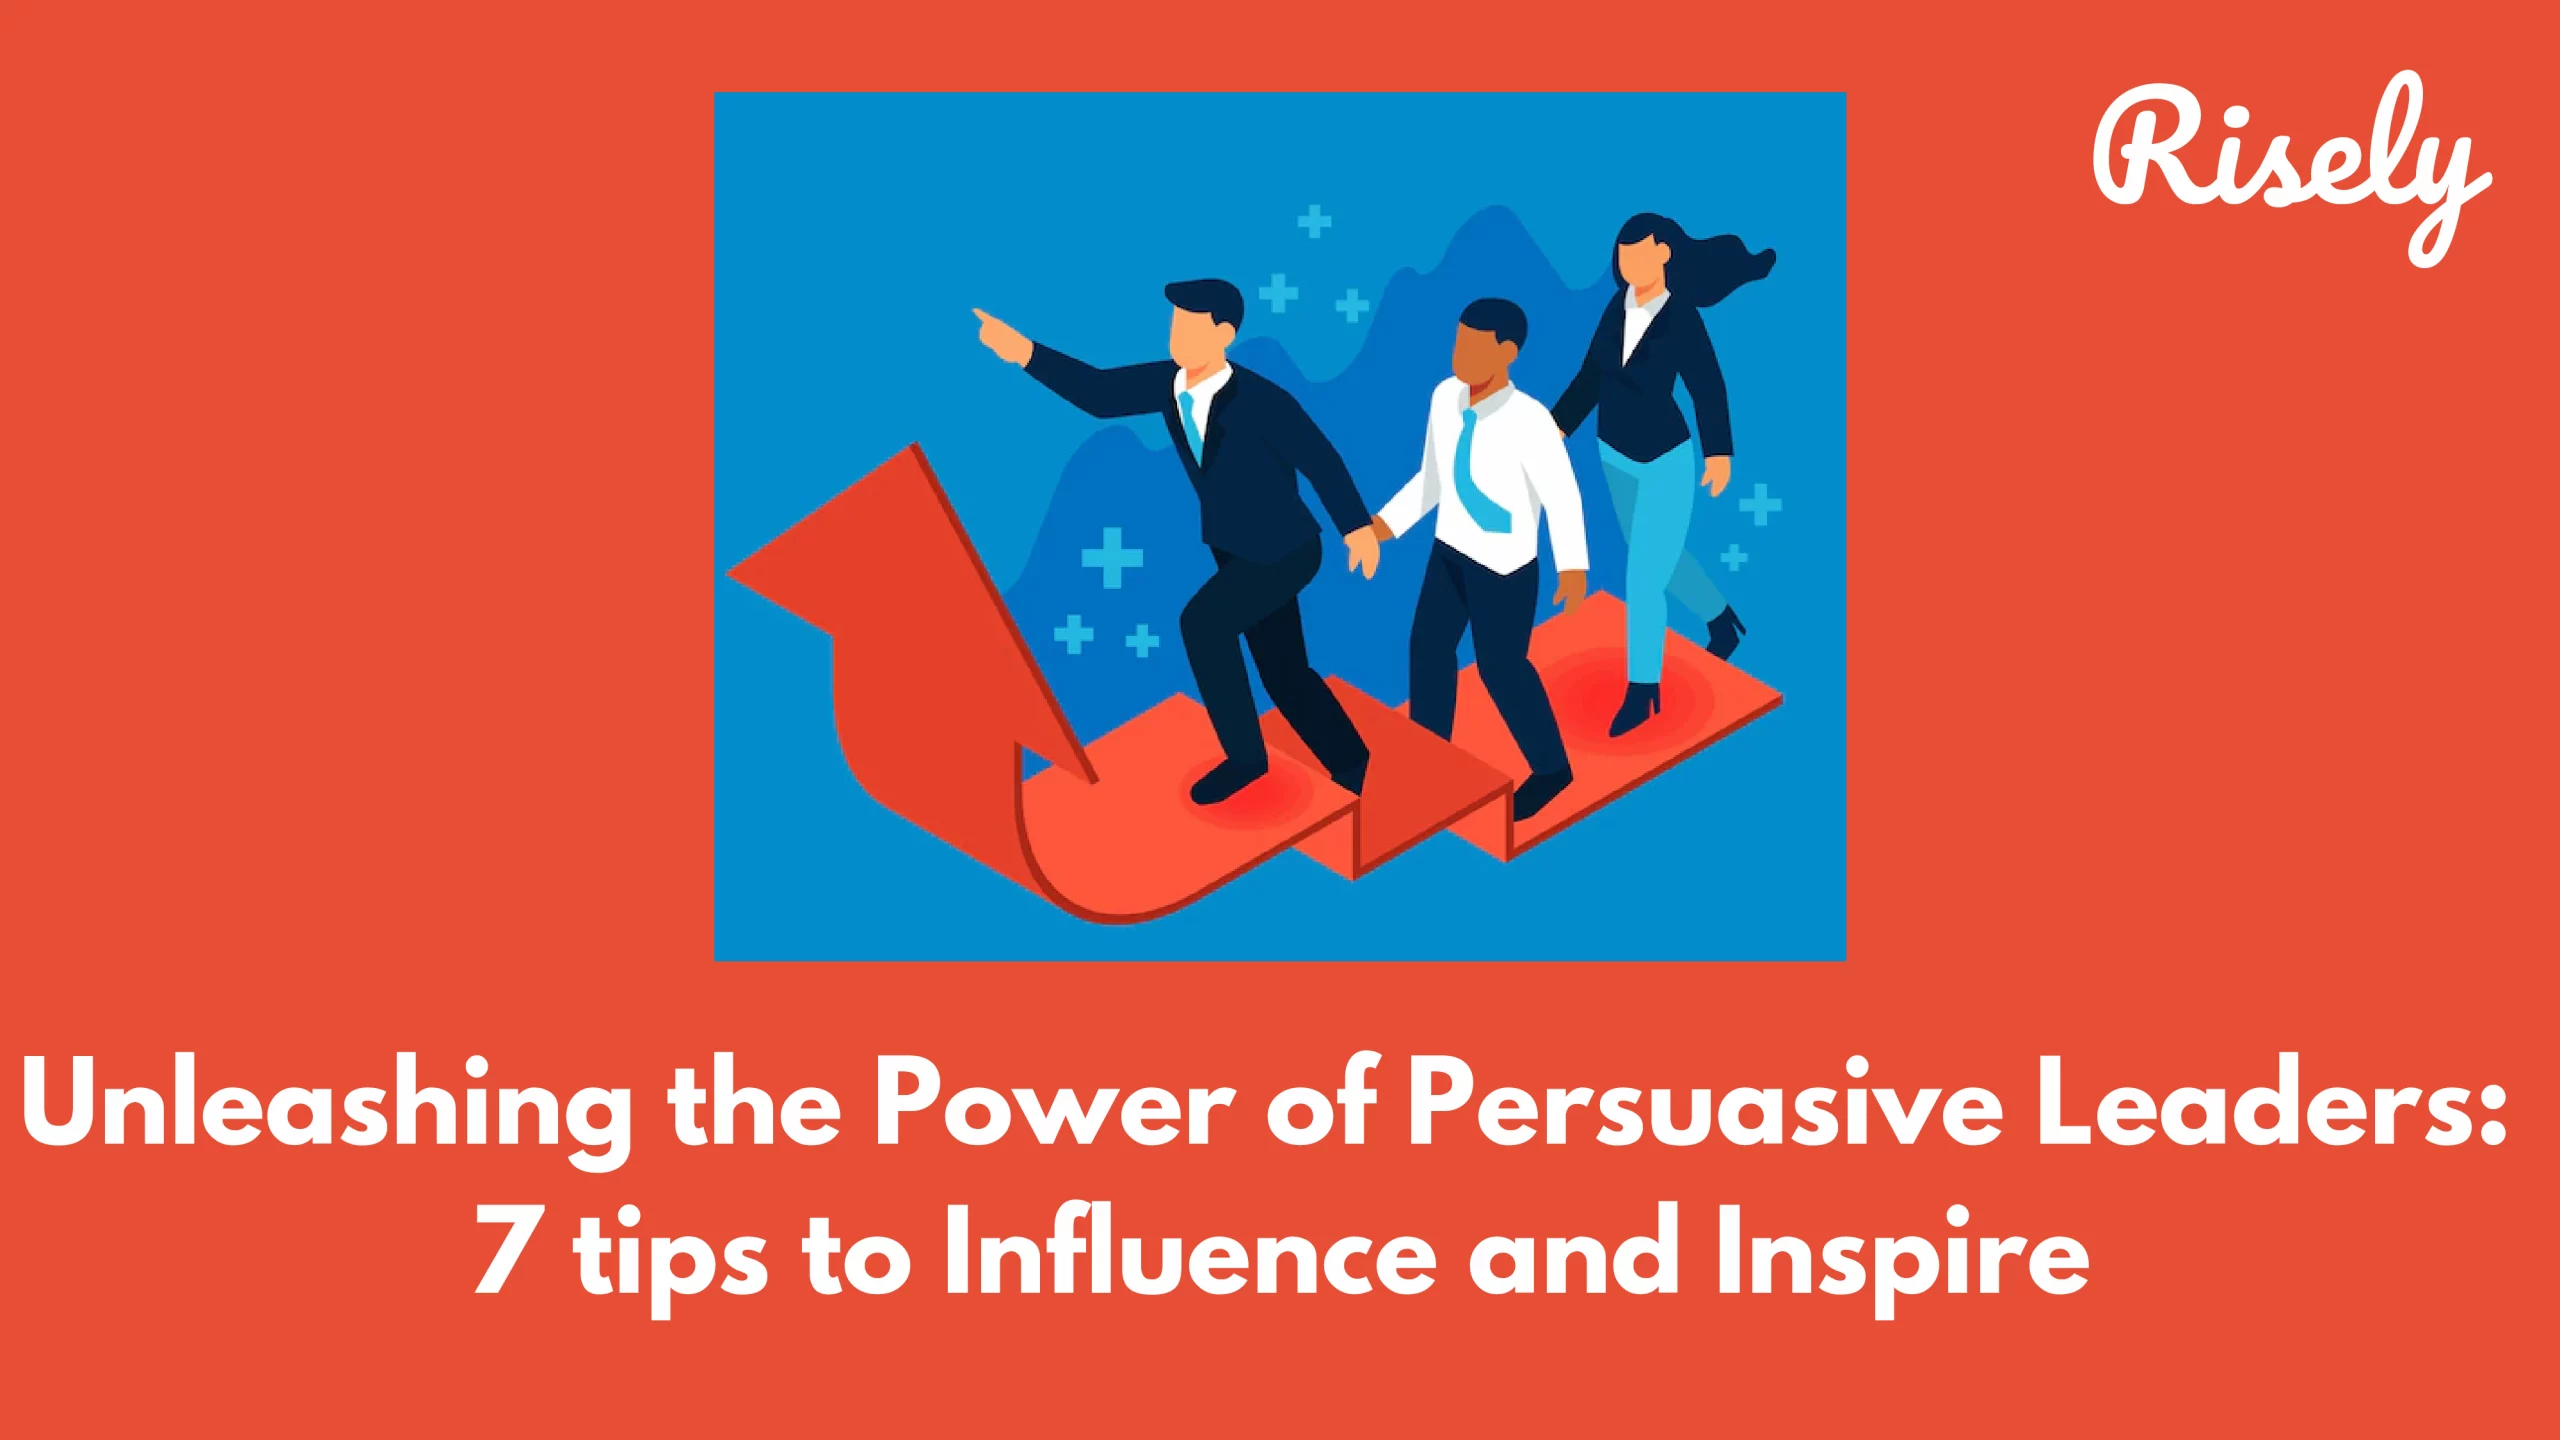 Unleashing the Power of Persuasive Leaders: 7 tips to Influence and Inspire